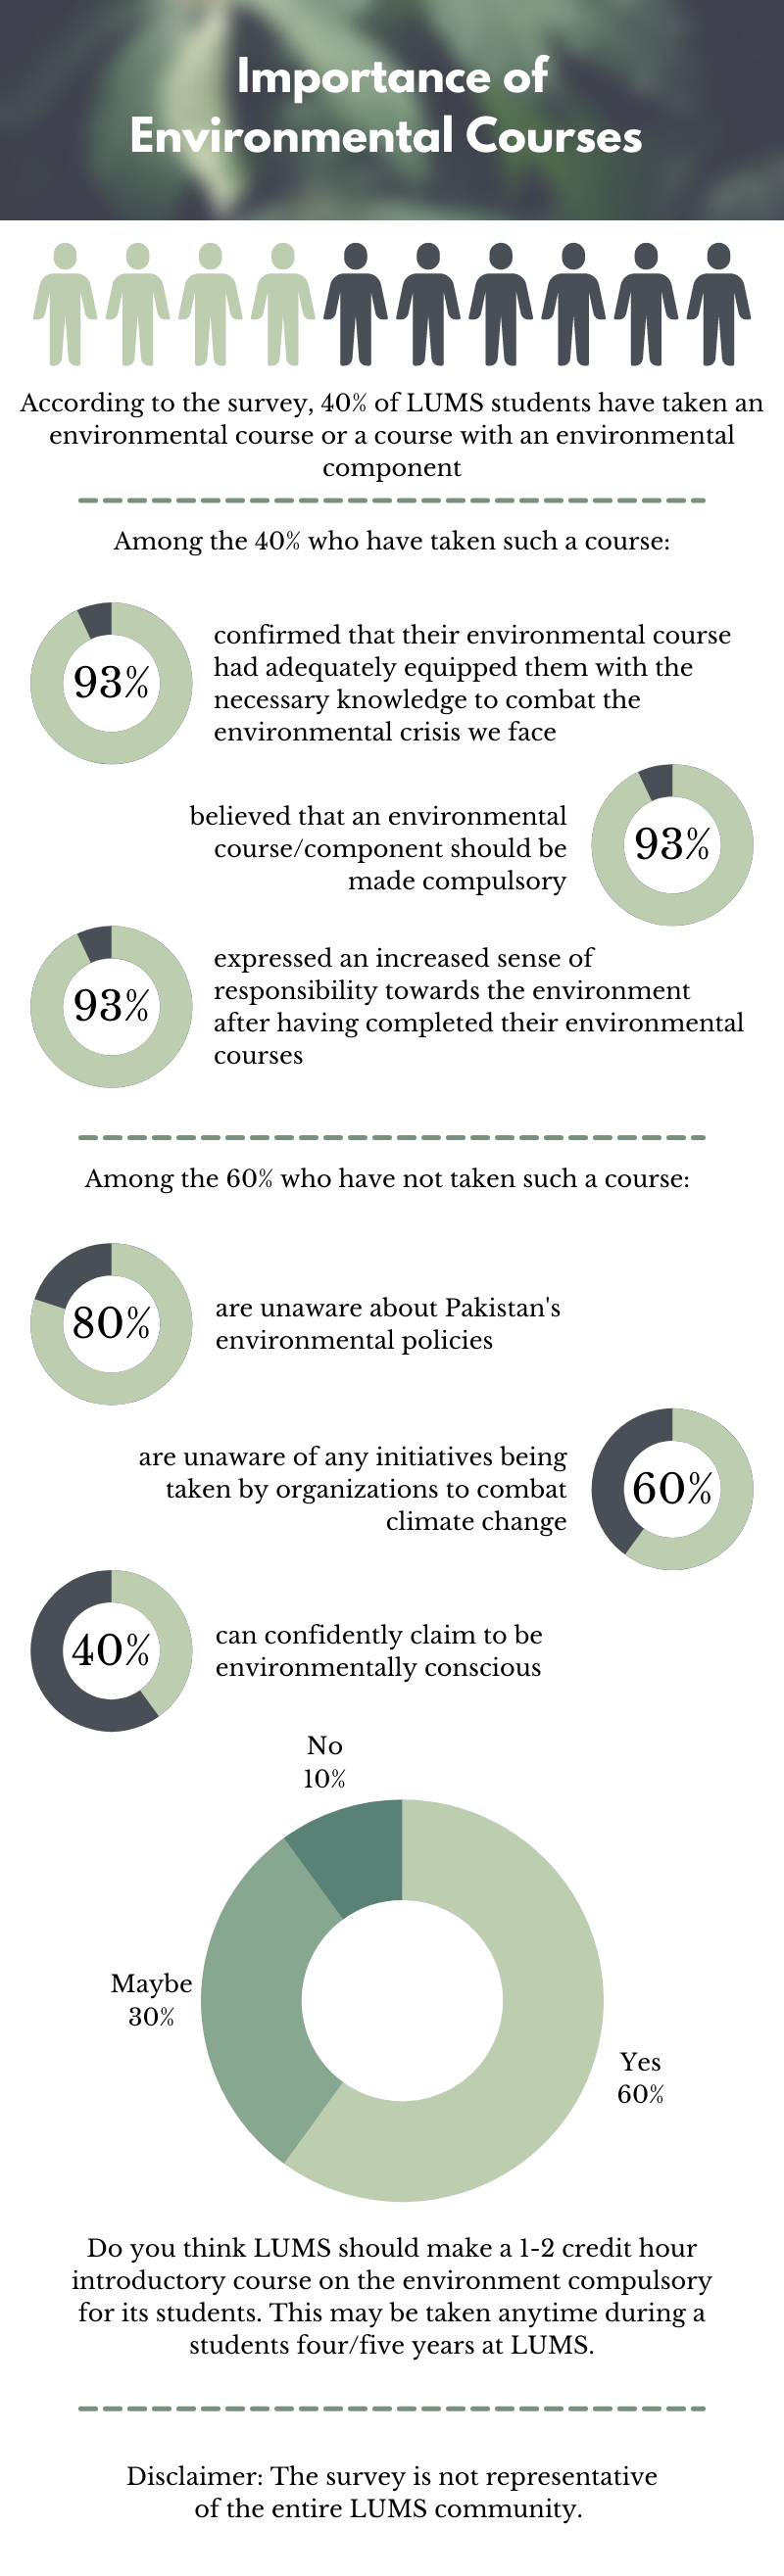 According to the survey, 40% of LUMS students have taken an environmental course or a course with an environmental component